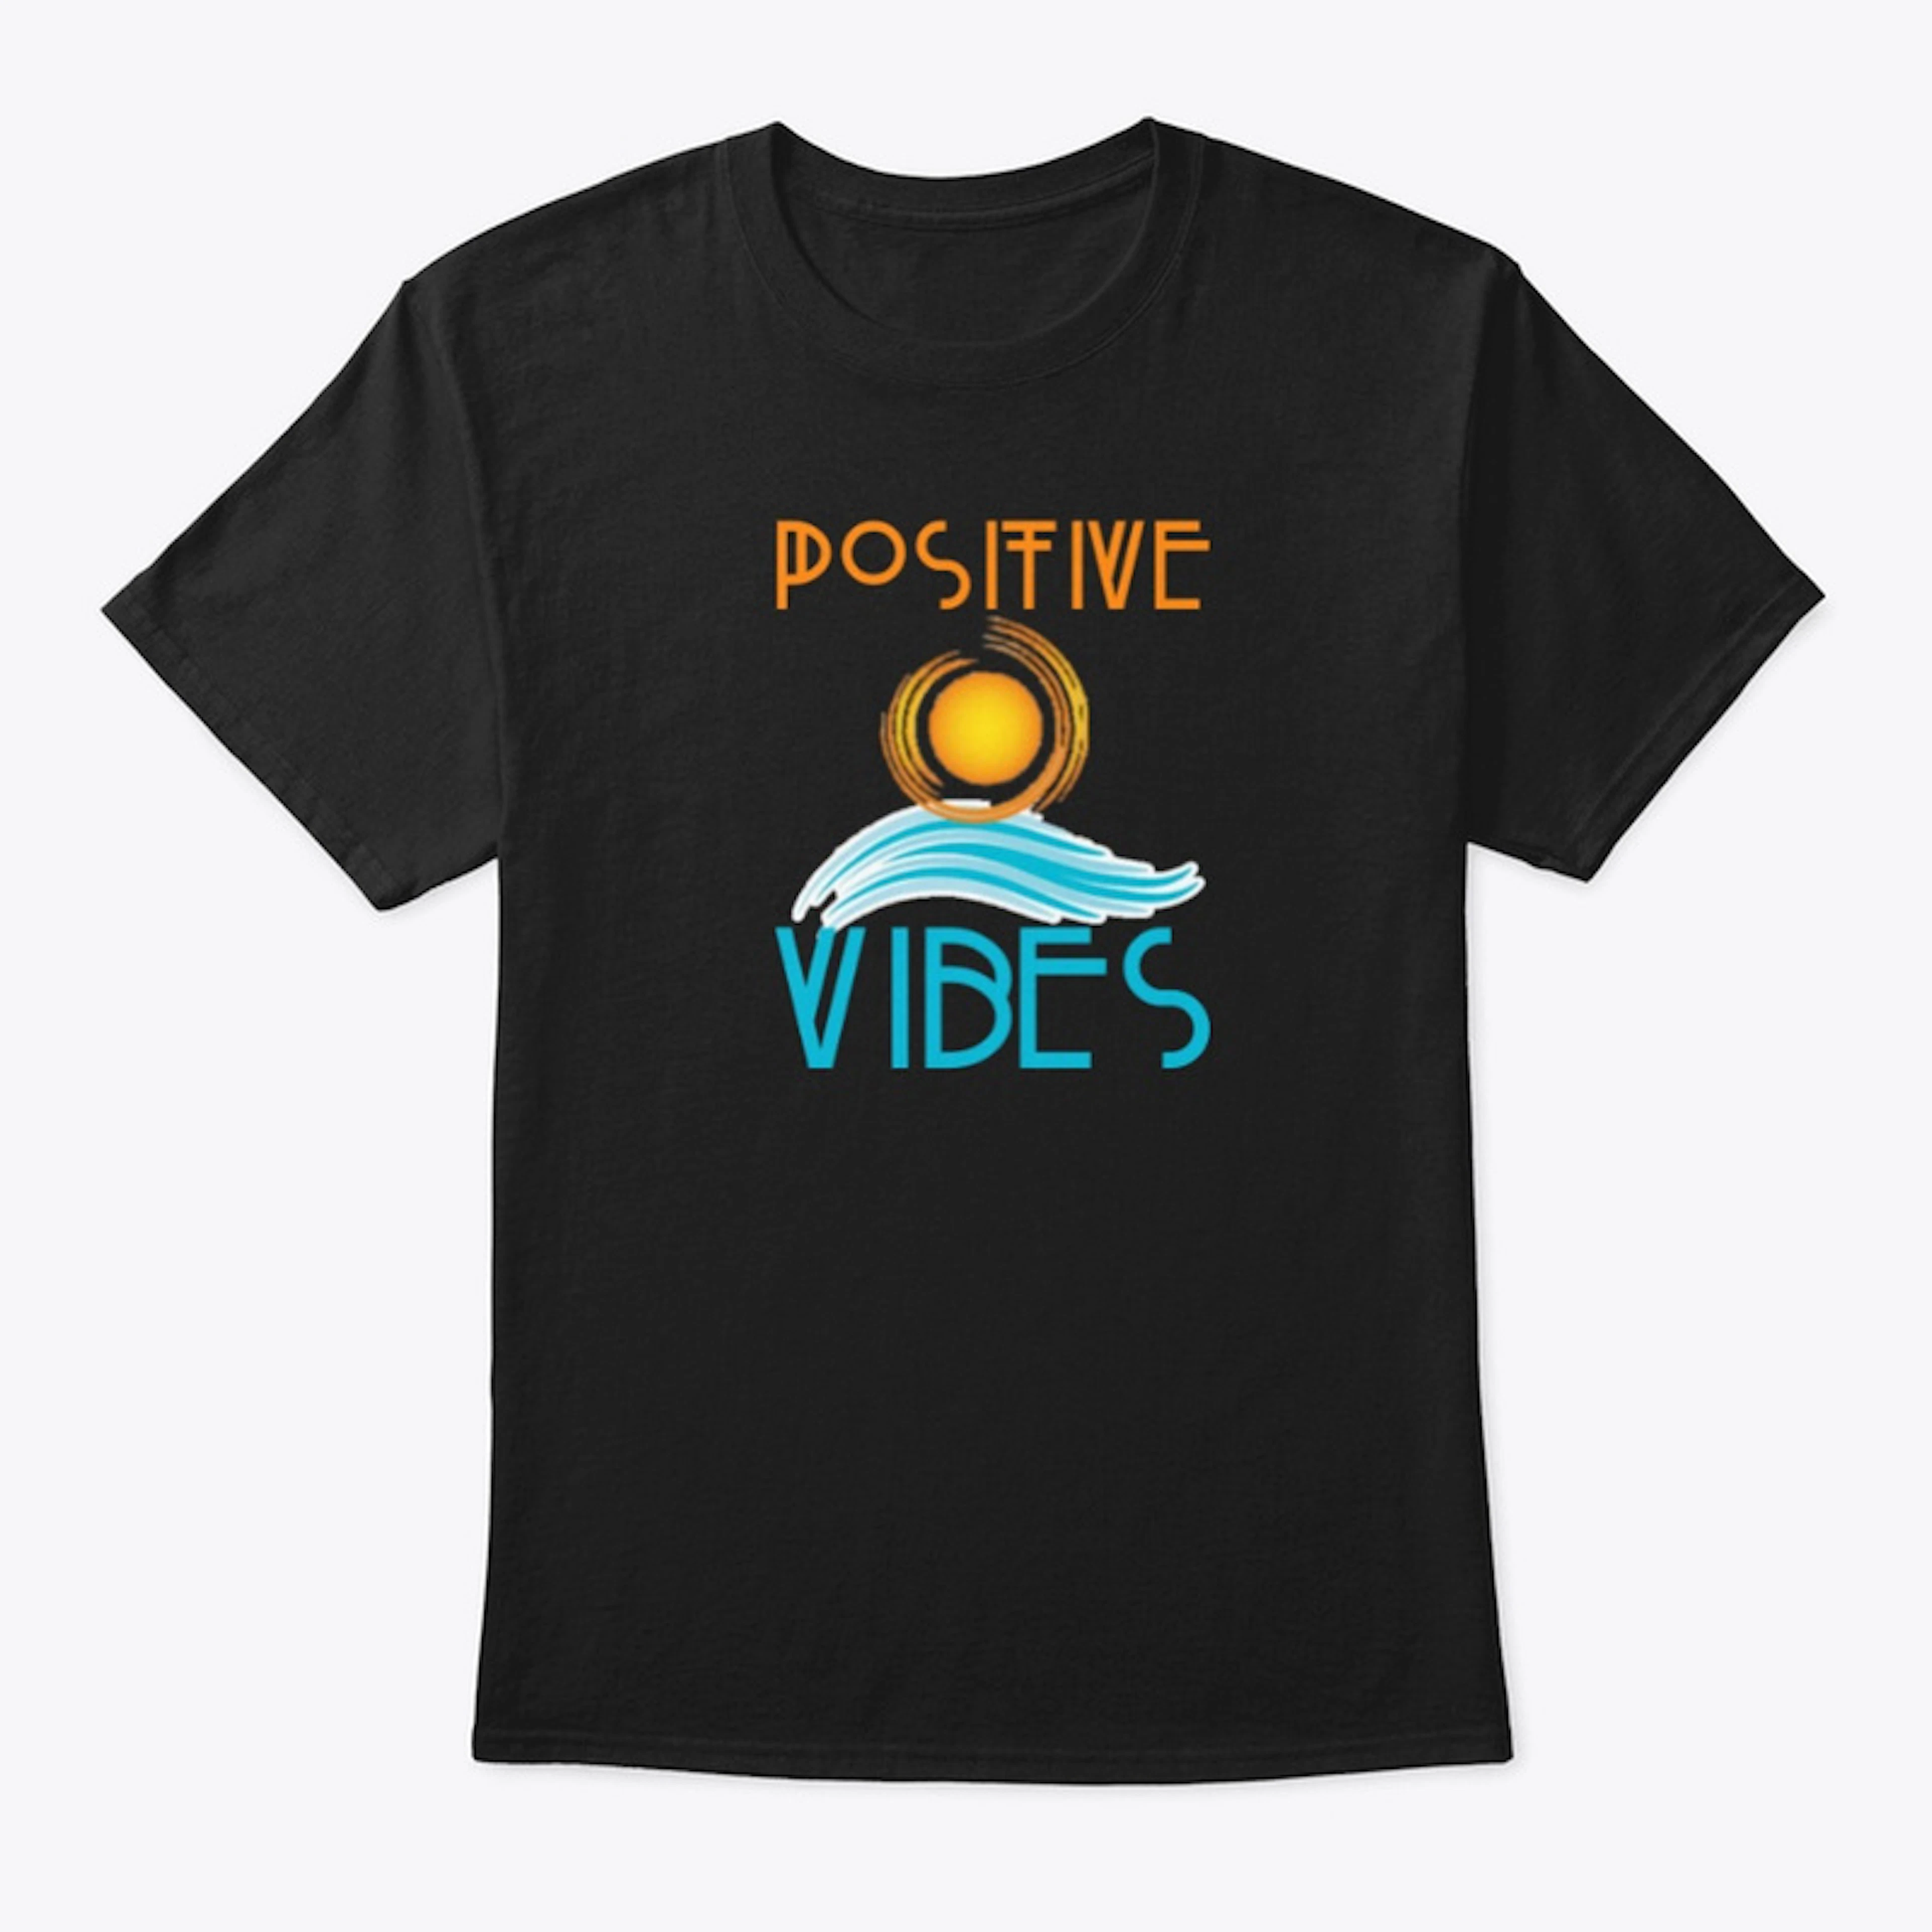 Positive Vibes: Sun and Surf